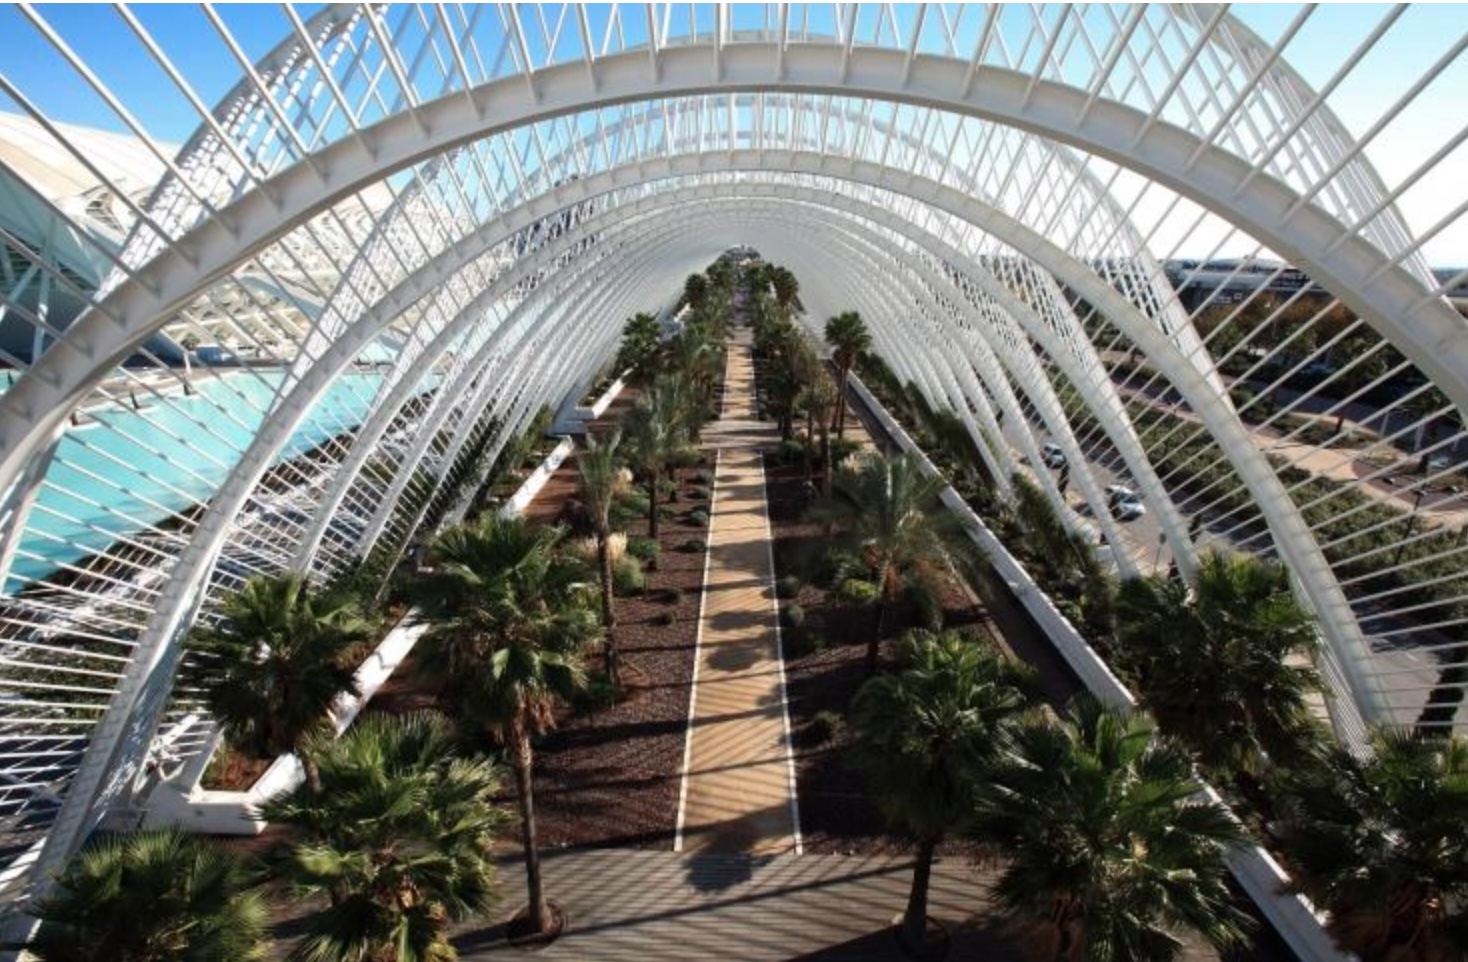 inside the city of Arts and Sciences, Valencia